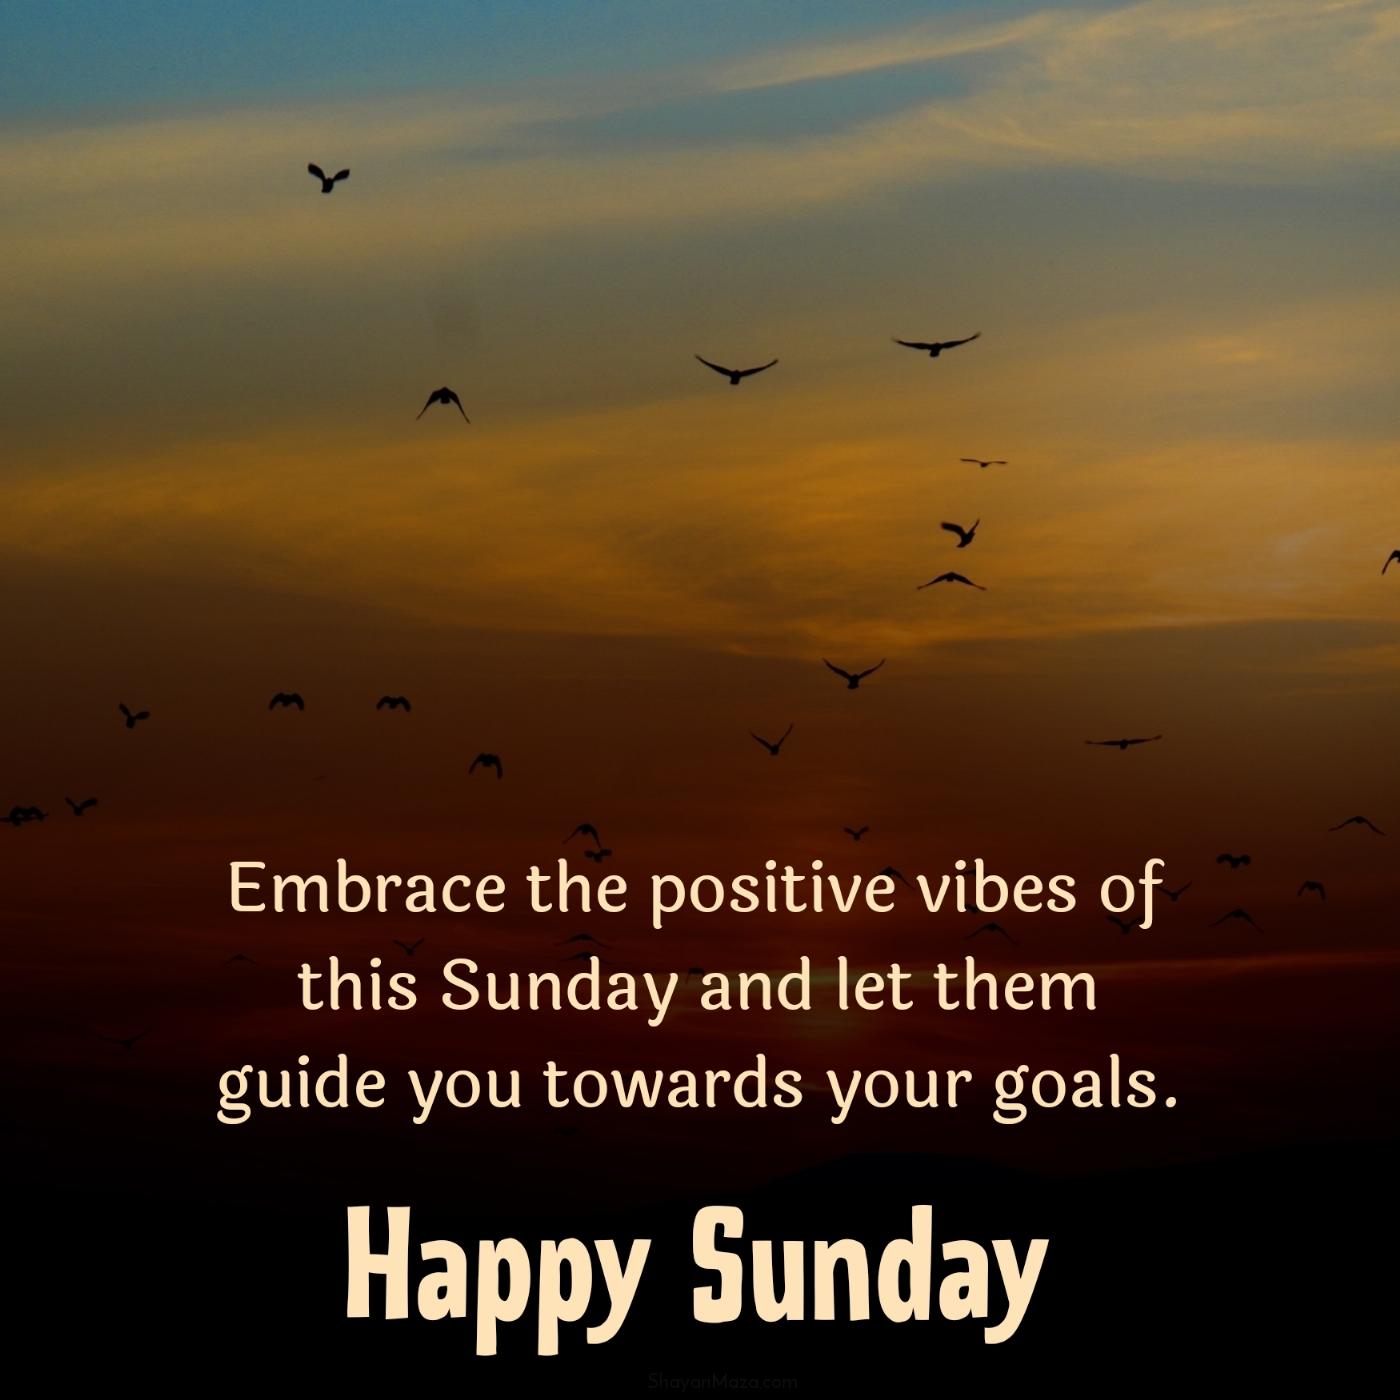 Embrace the positive vibes of this Sunday and let them guide